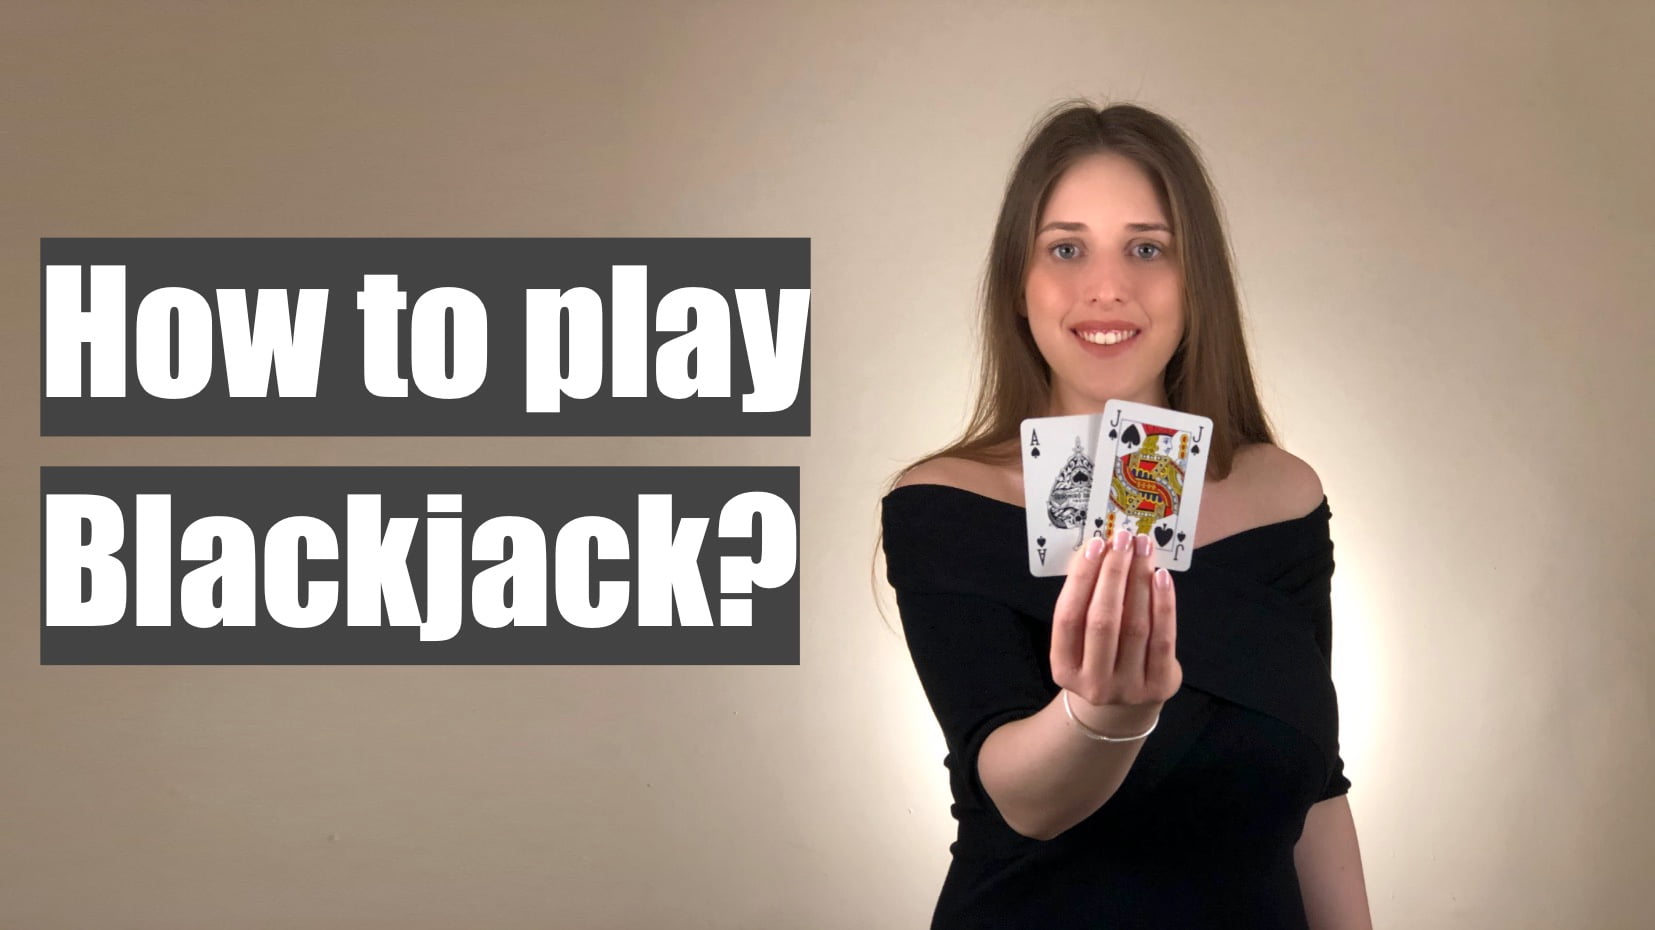 How to play Blackjack - basic rules, strategy, and card counting